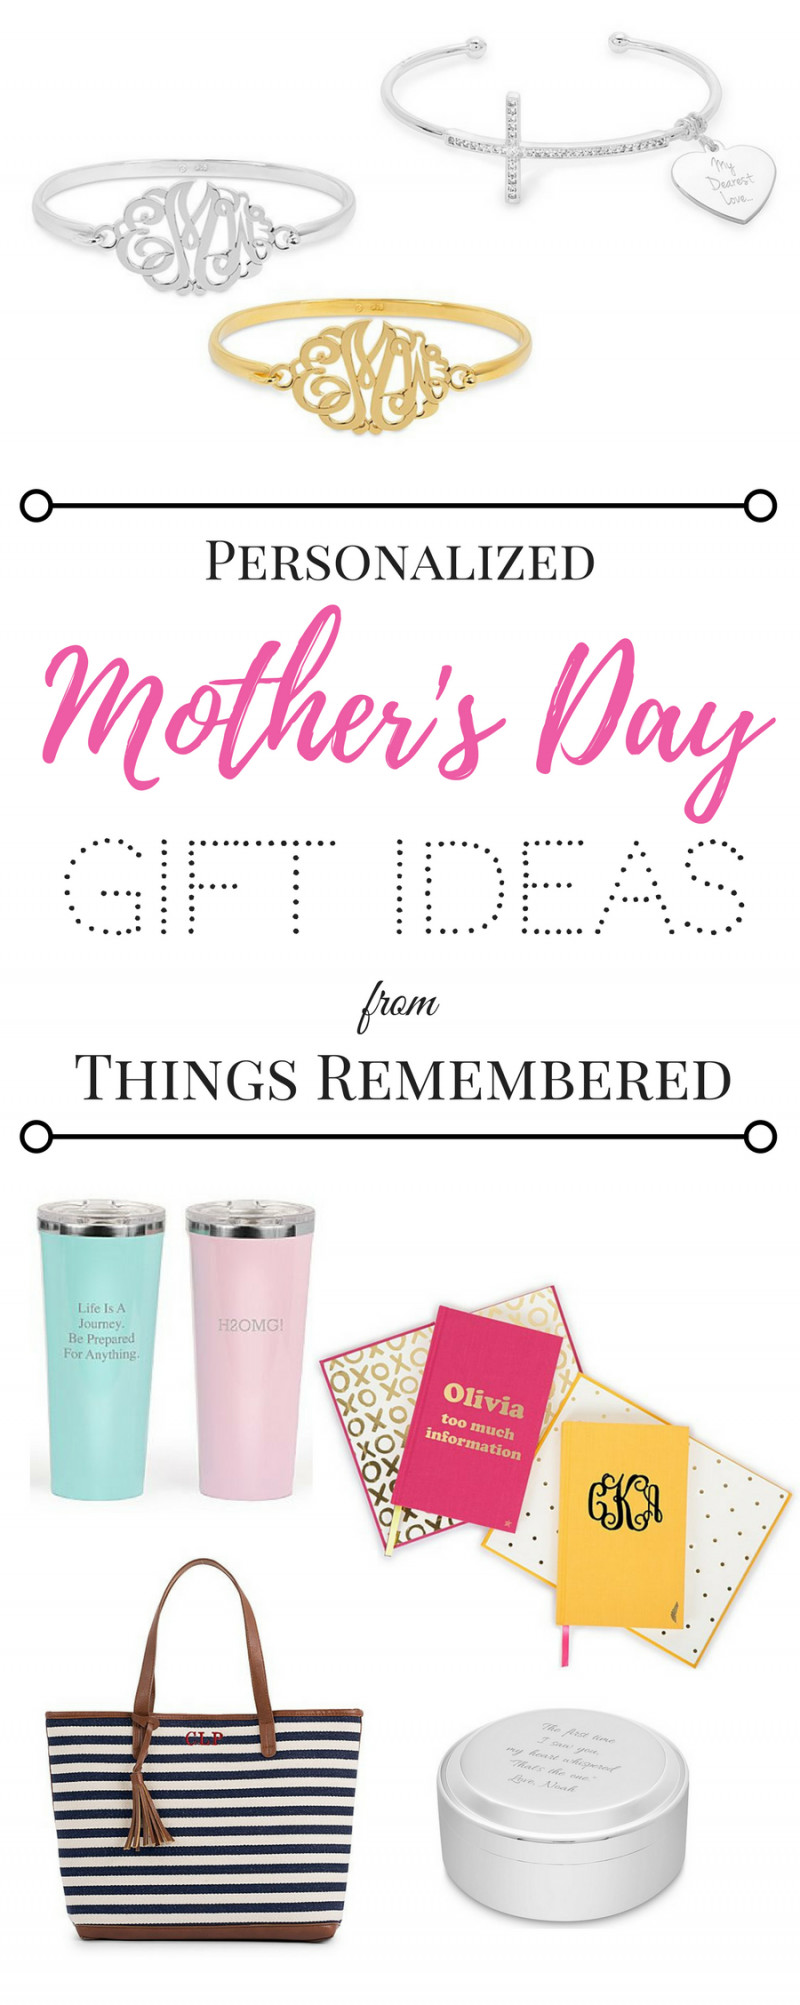 Mother'S Day Special Gift Ideas
 Personalized Mother s Day Gift Ideas from Things